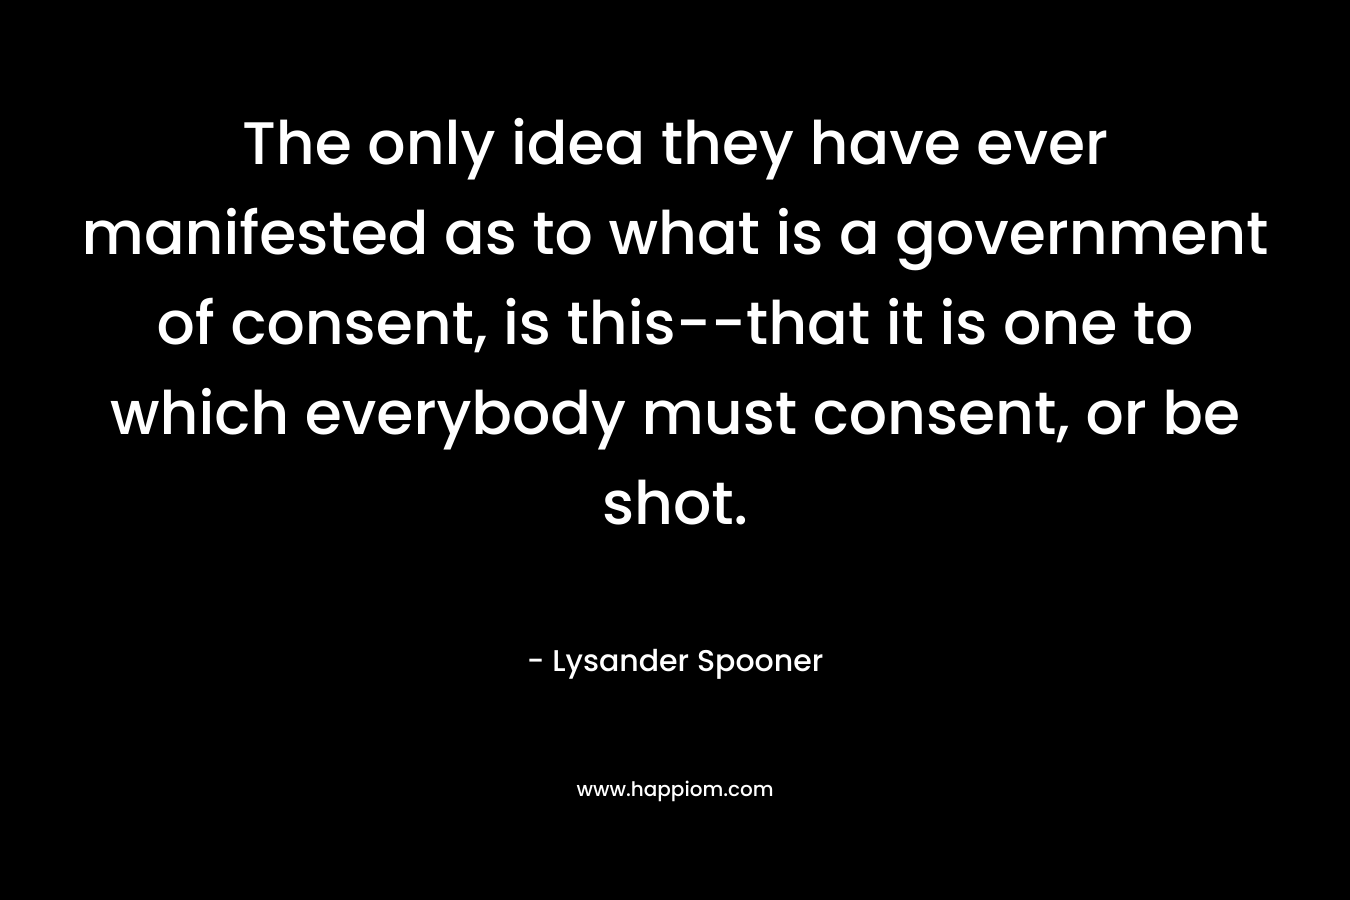 The only idea they have ever manifested as to what is a government of consent, is this--that it is one to which everybody must consent, or be shot.